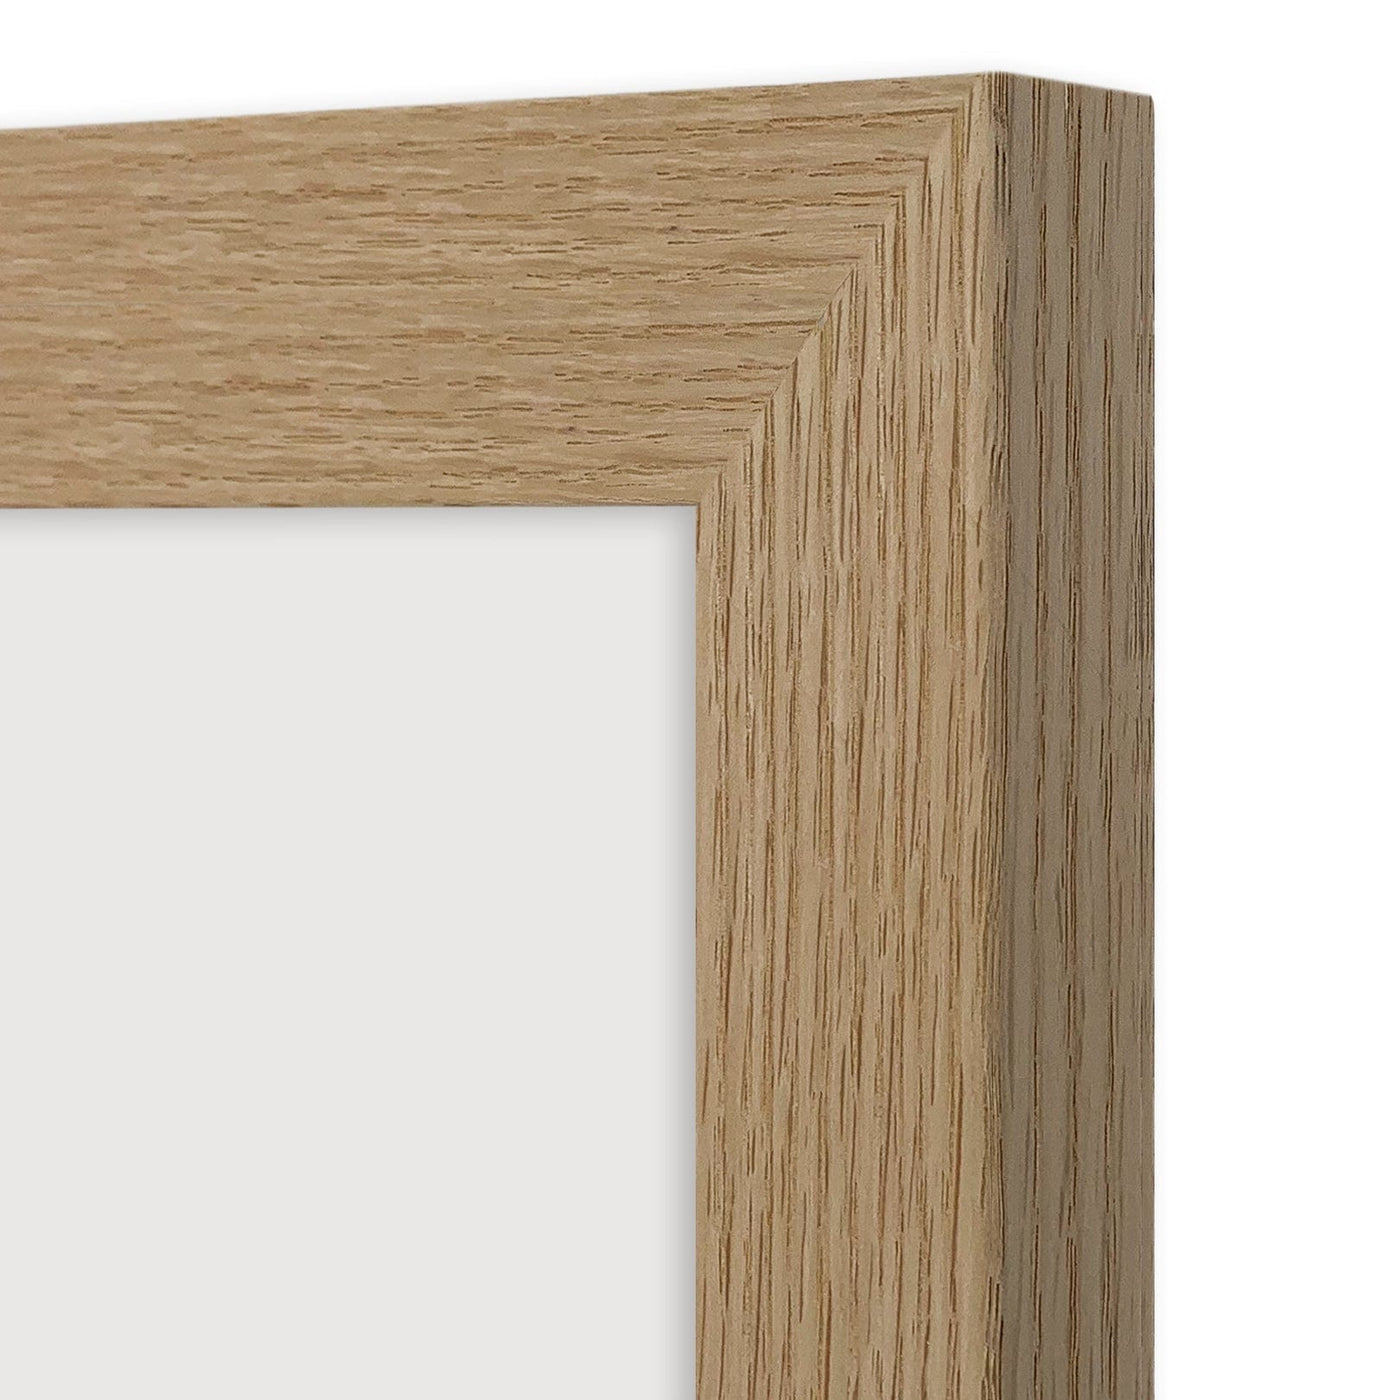 Classic Natural Oak A1 Picture Frame to suit A2 image from our Australian Made A1 Picture Frames collection by Profile Products Australia